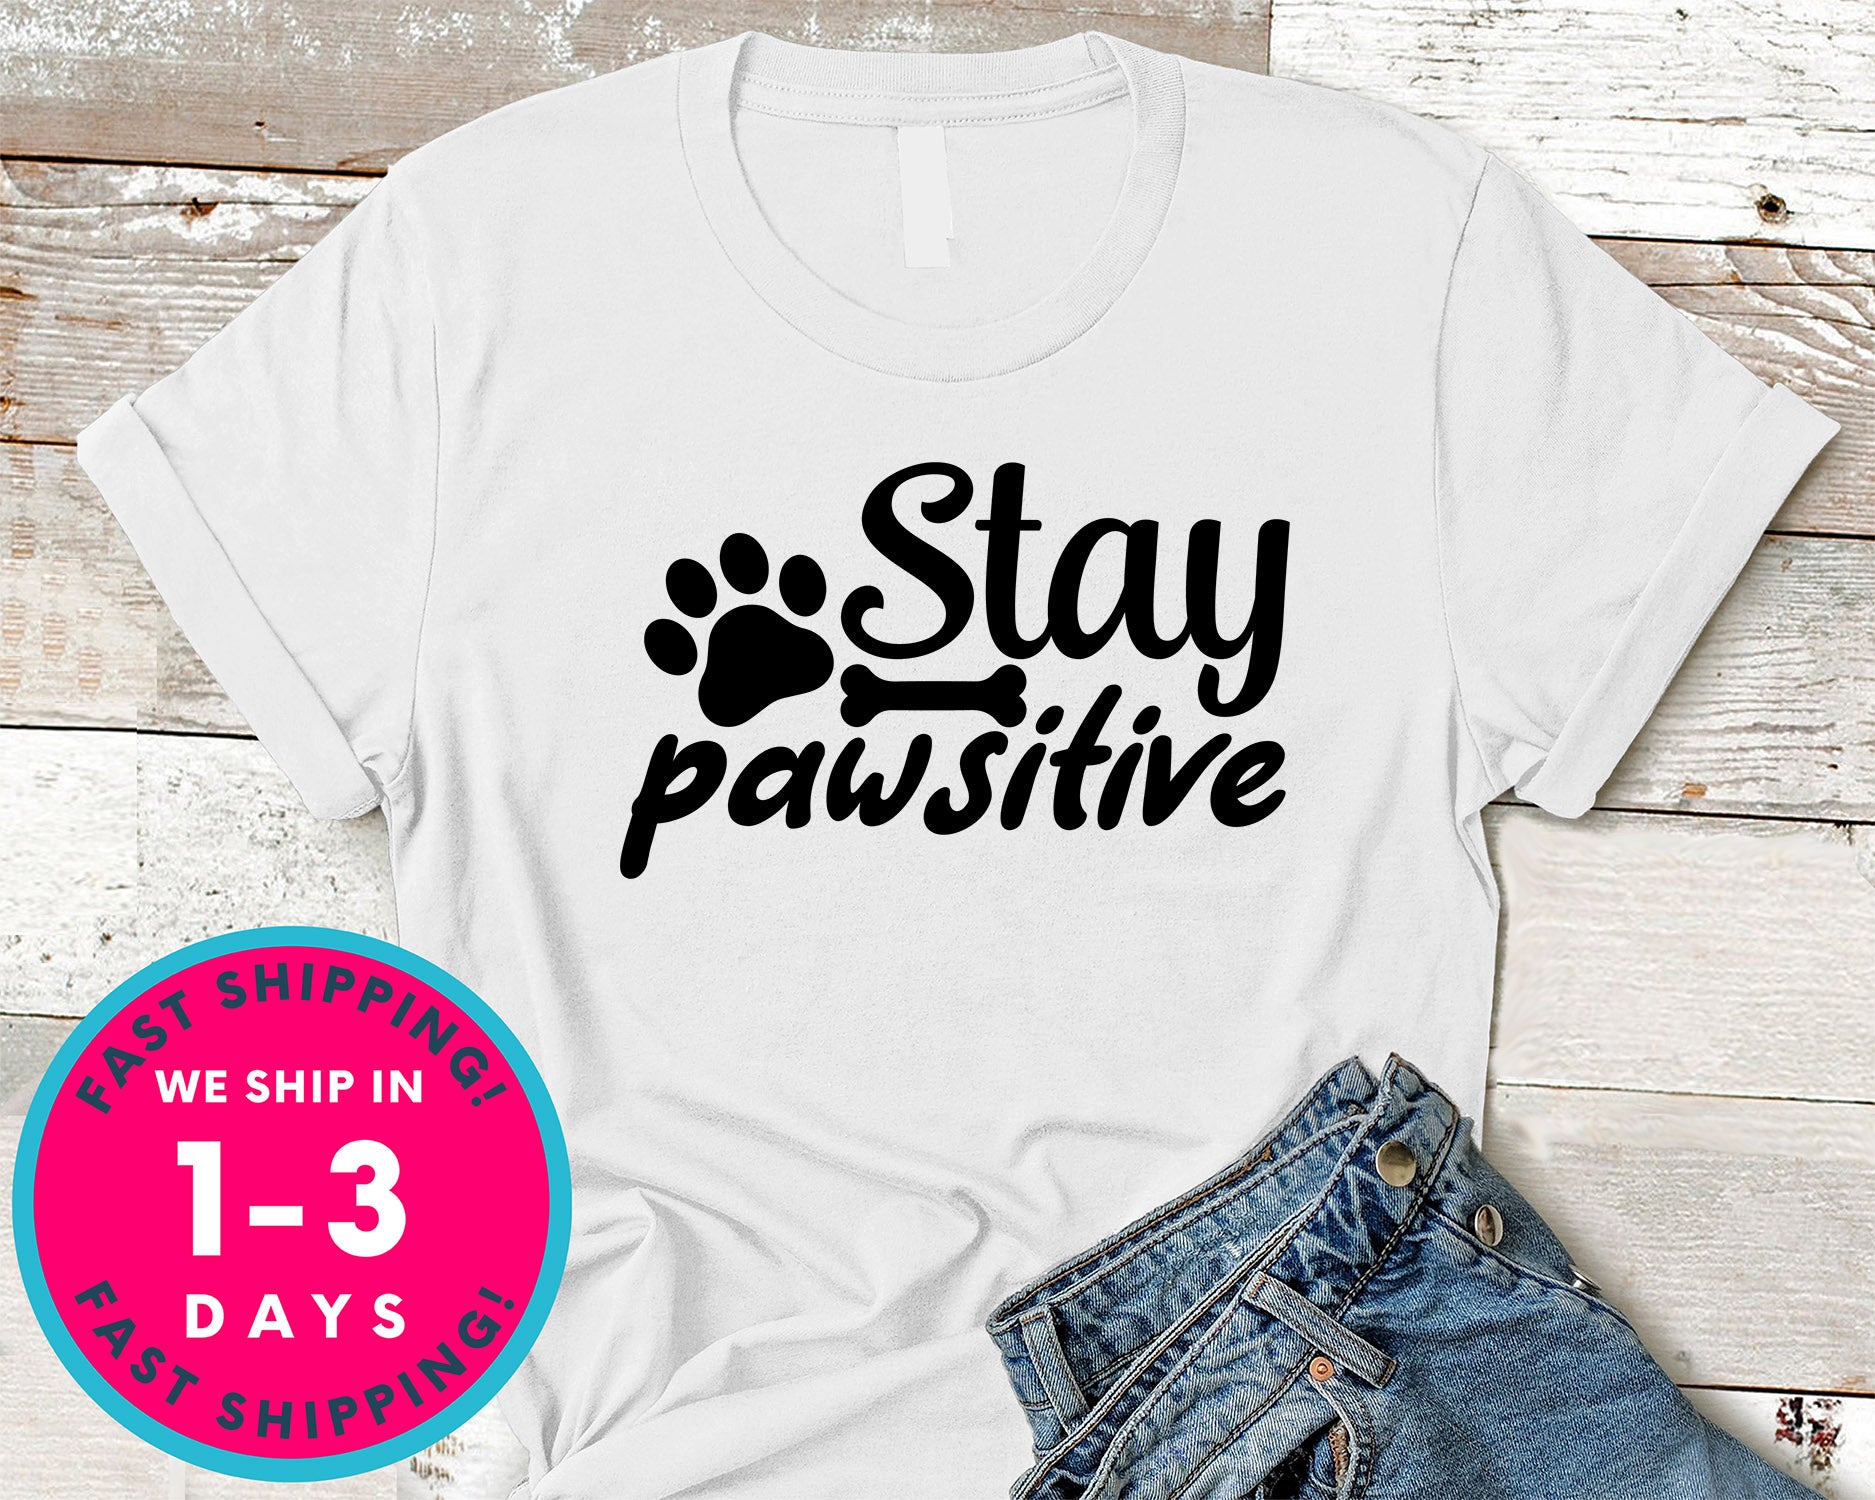 Stay Paw Sitive